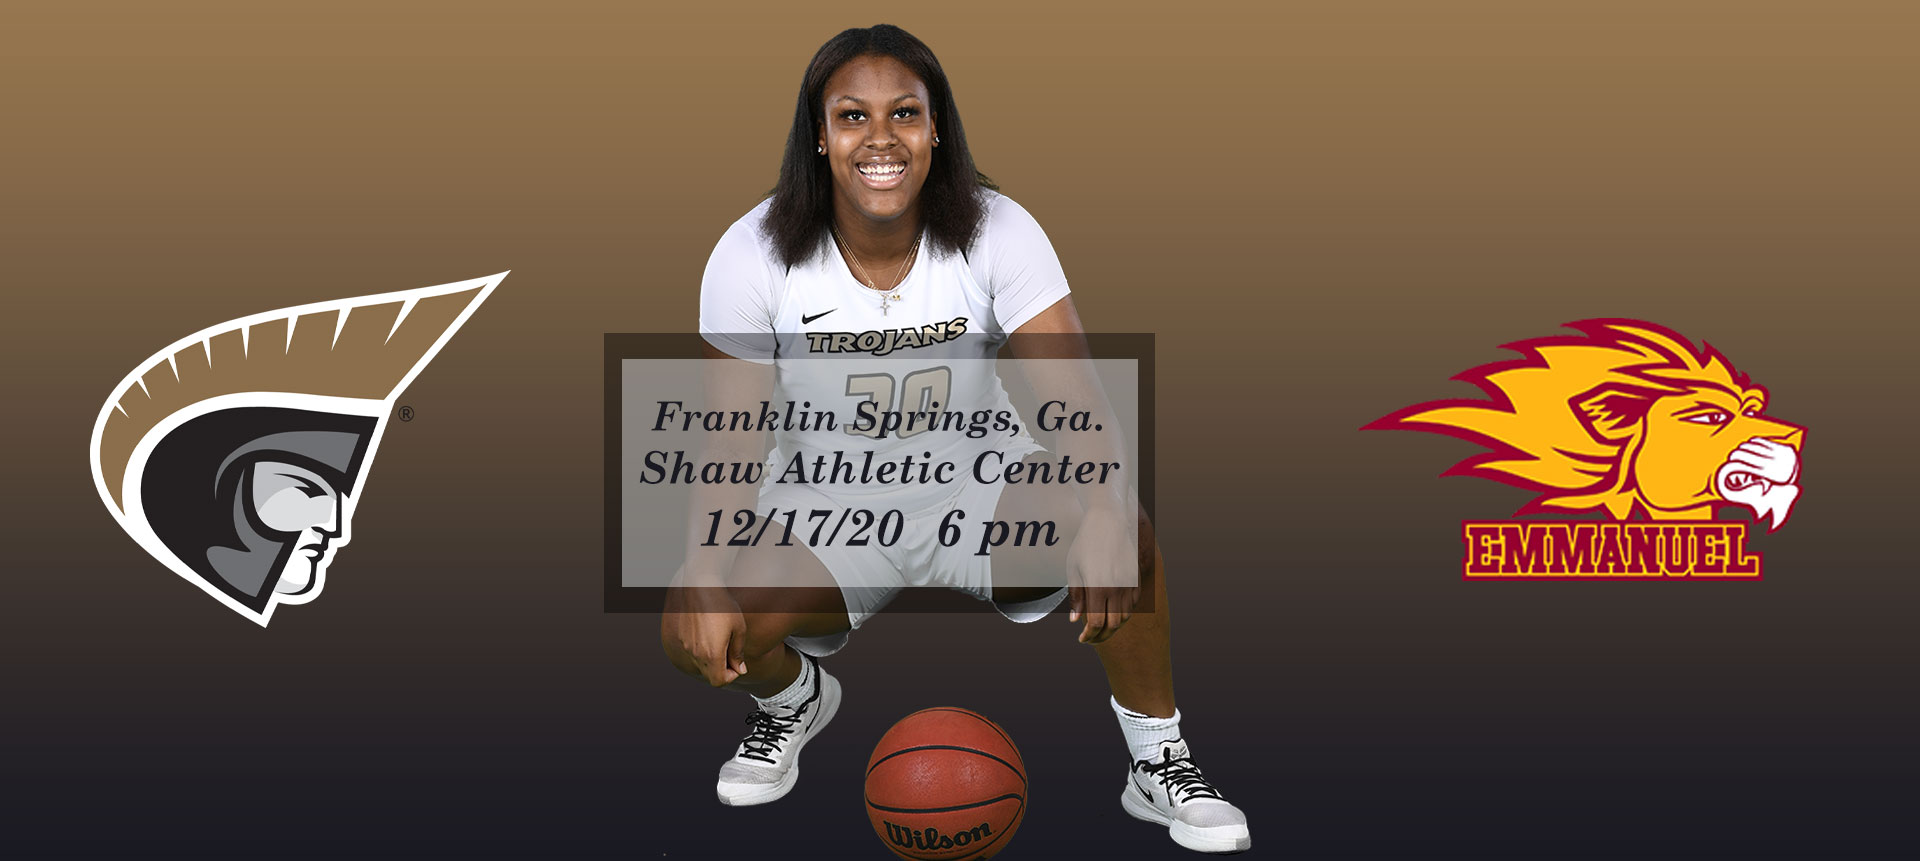 Women’s Basketball Game Notes Released for Emmanuel